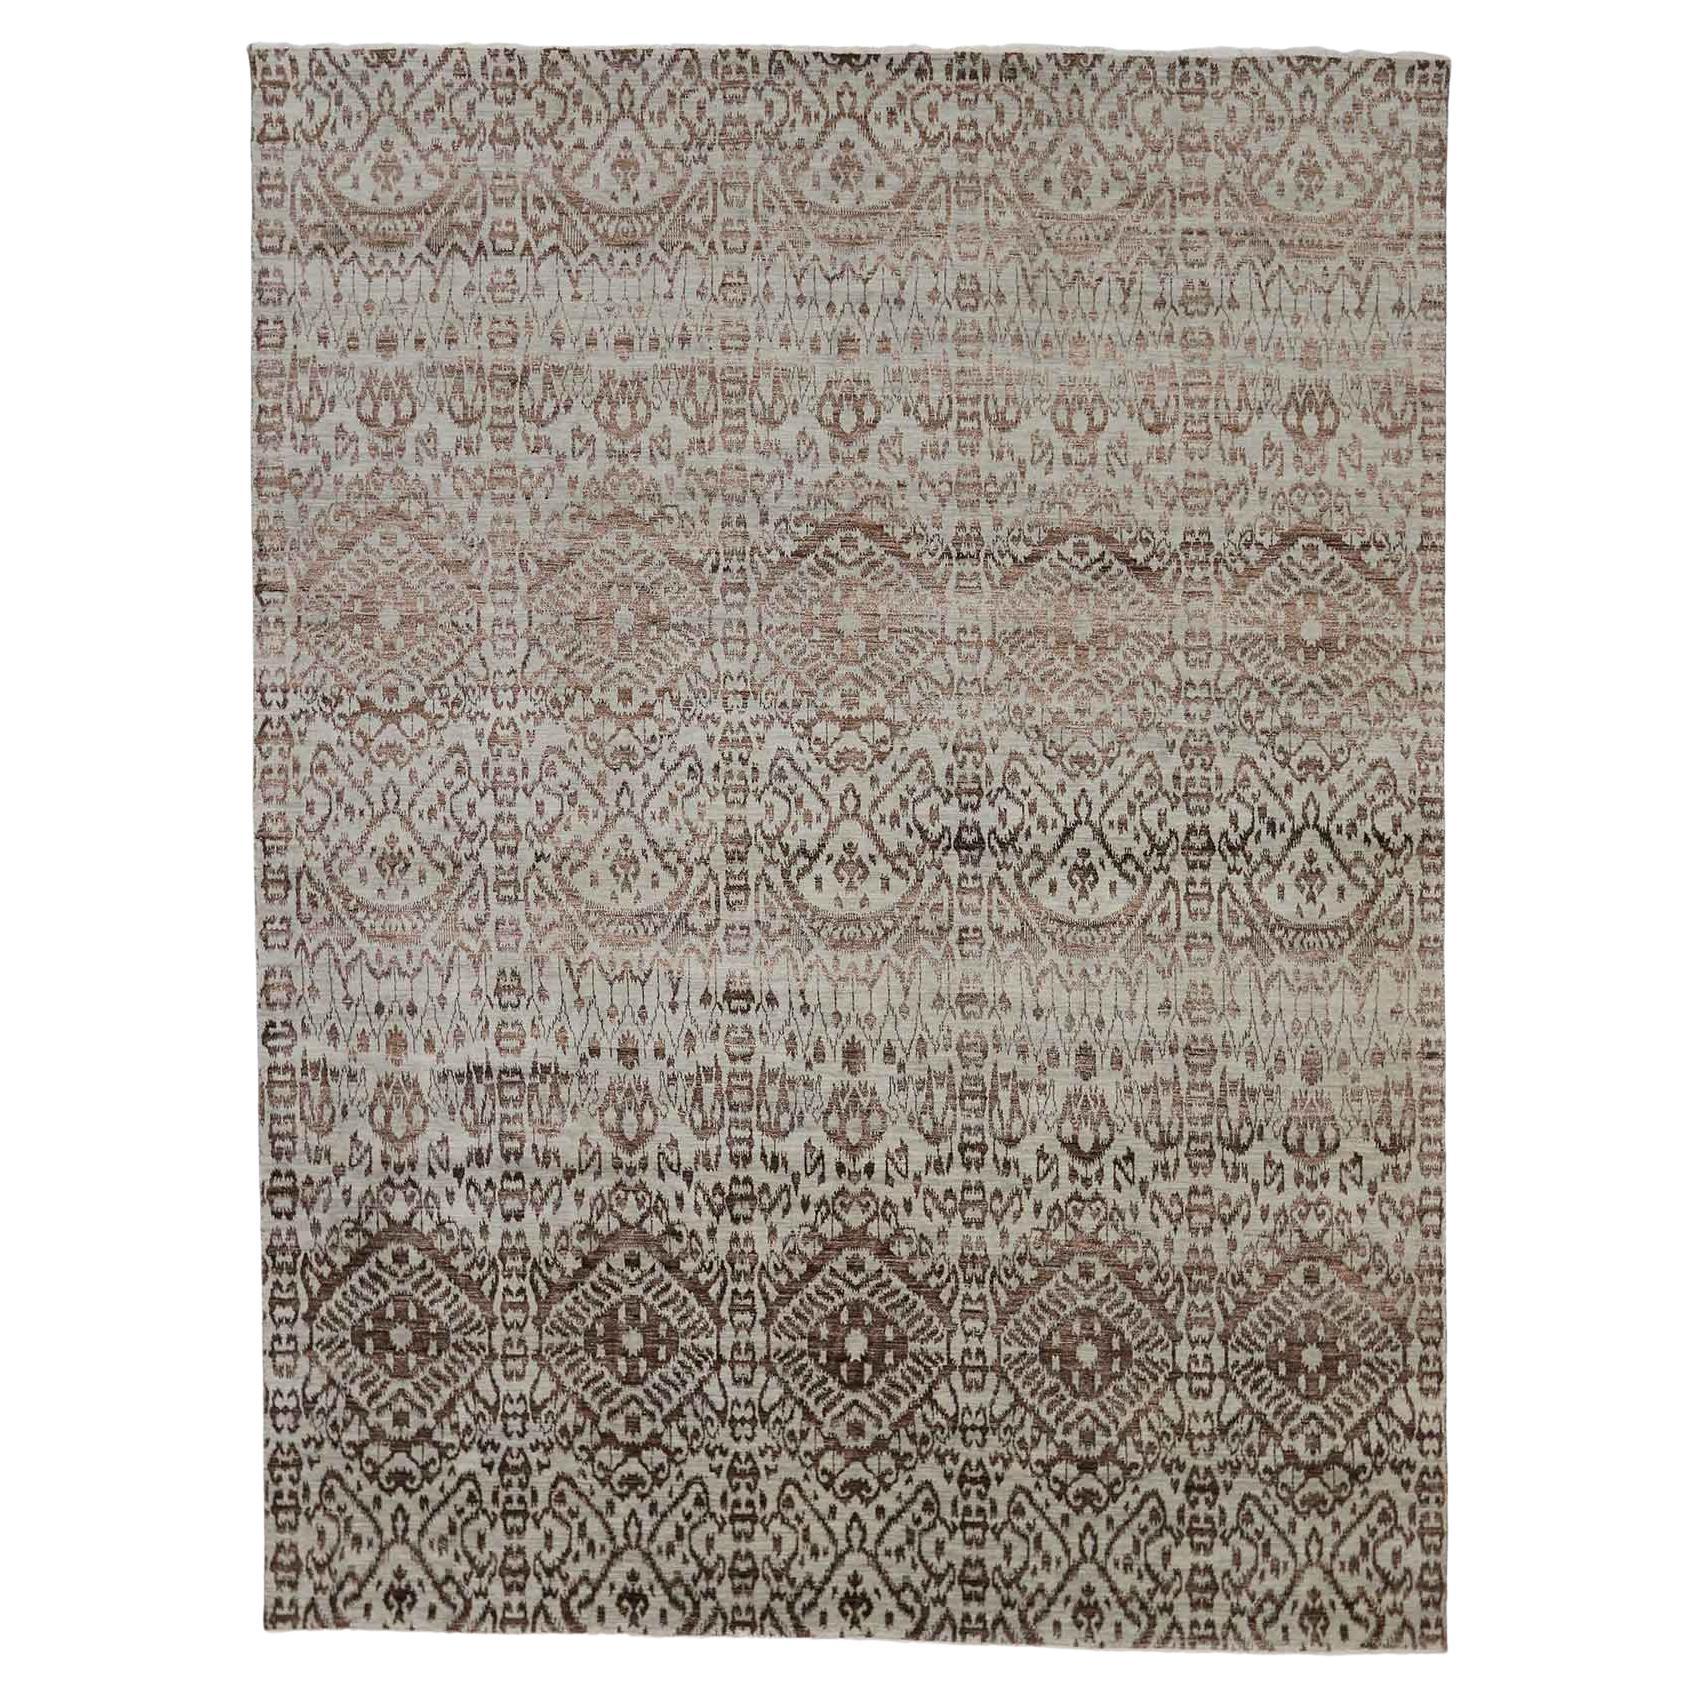 New Wool and Silk Ikat Rug with Transitional Style and Earth-Tone Color Palette For Sale